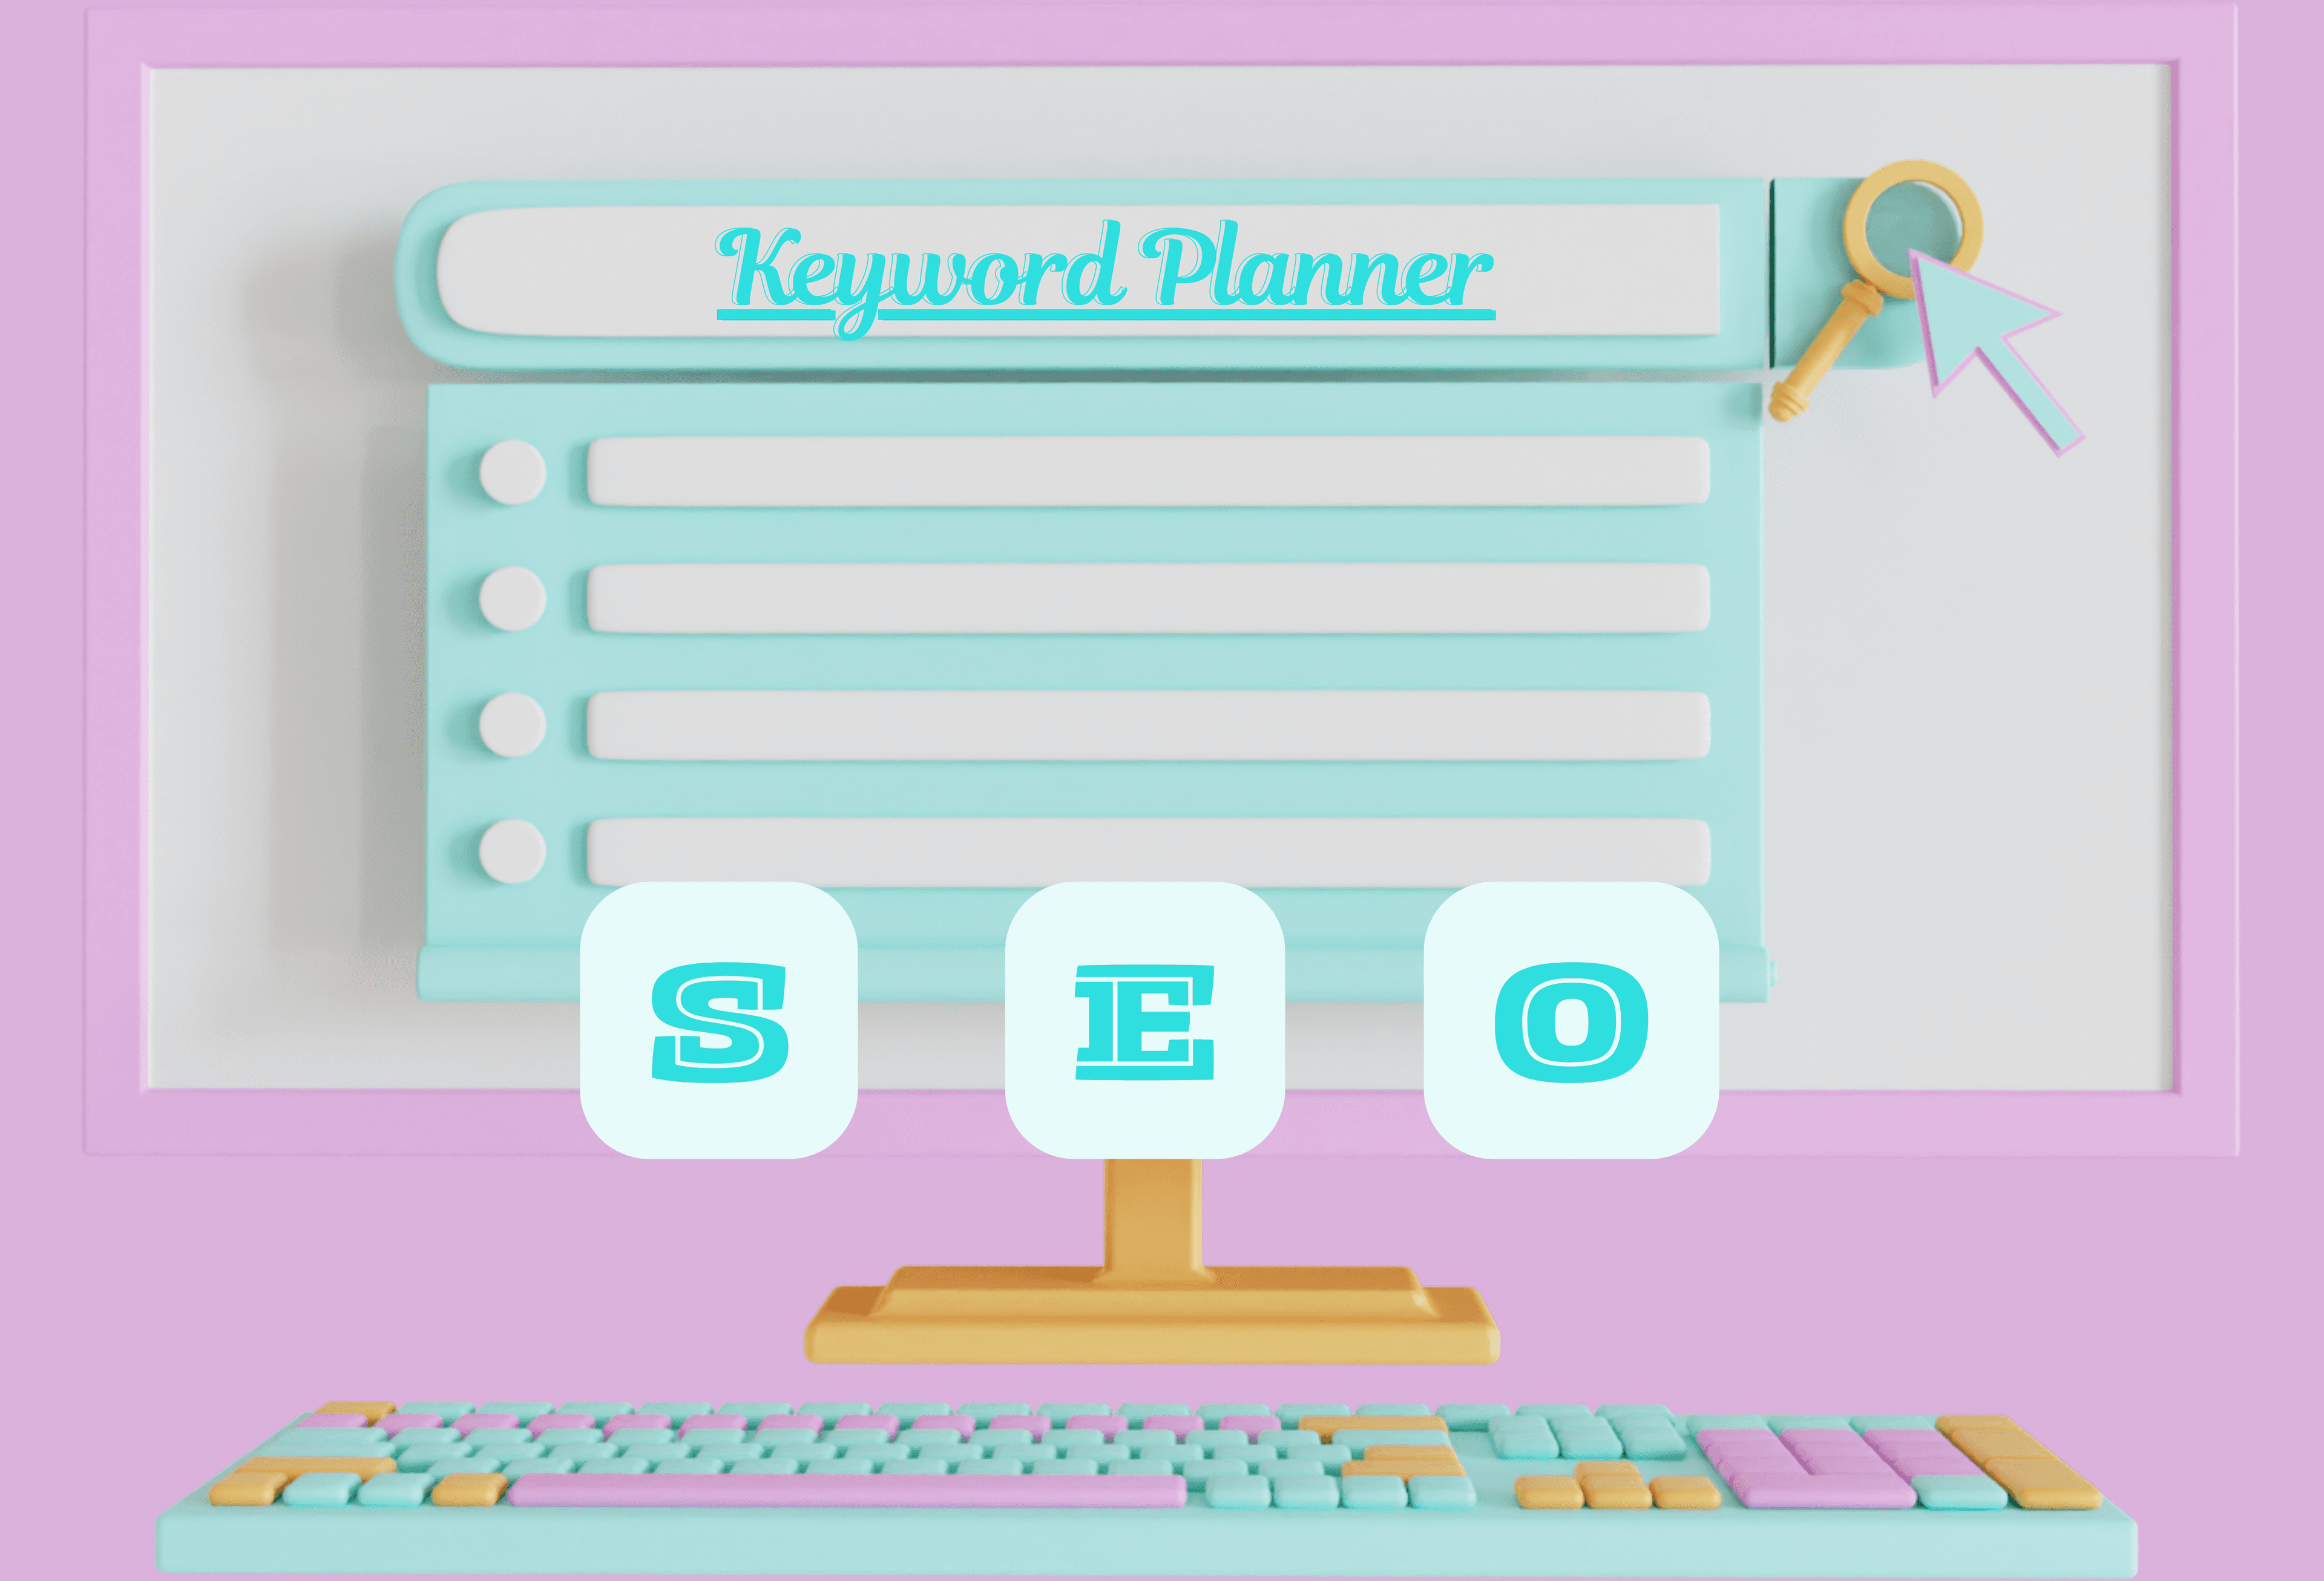 Learn How to Effectively Use the Google Keyword Planner Tool for In-Depth SEO Keyword Research